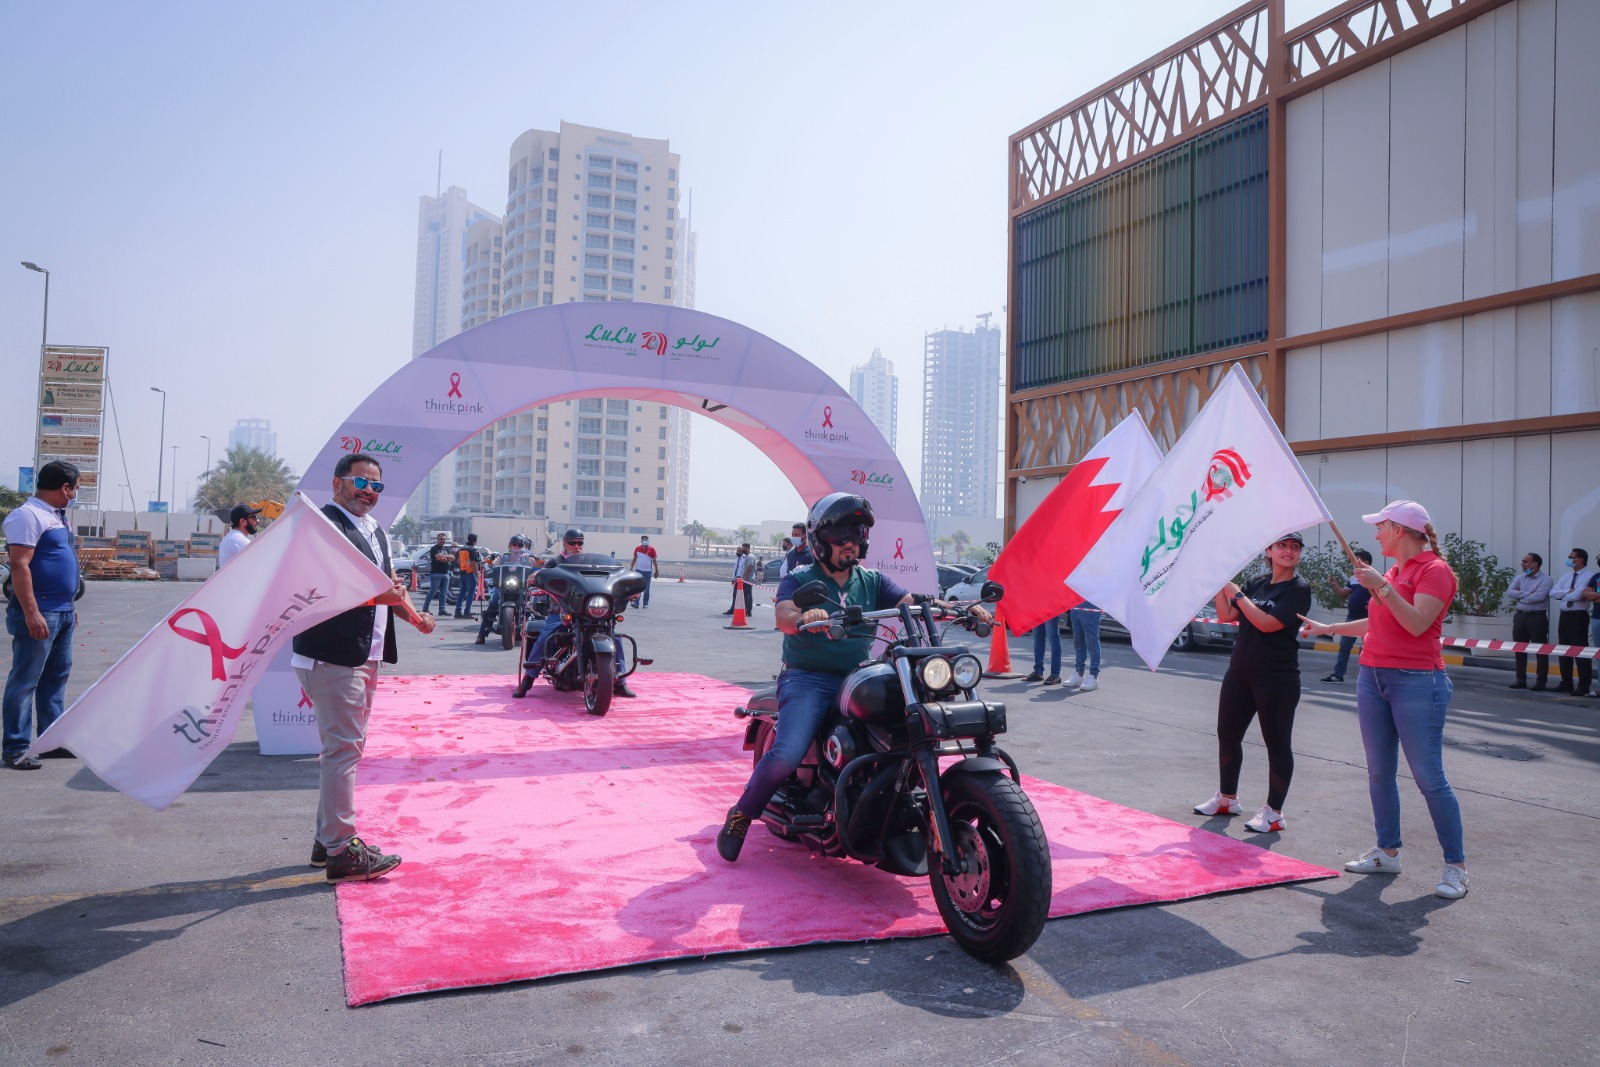 LULU DRIVES ‘THINK PINK’ SUPPORT WITH BIKER PARADE